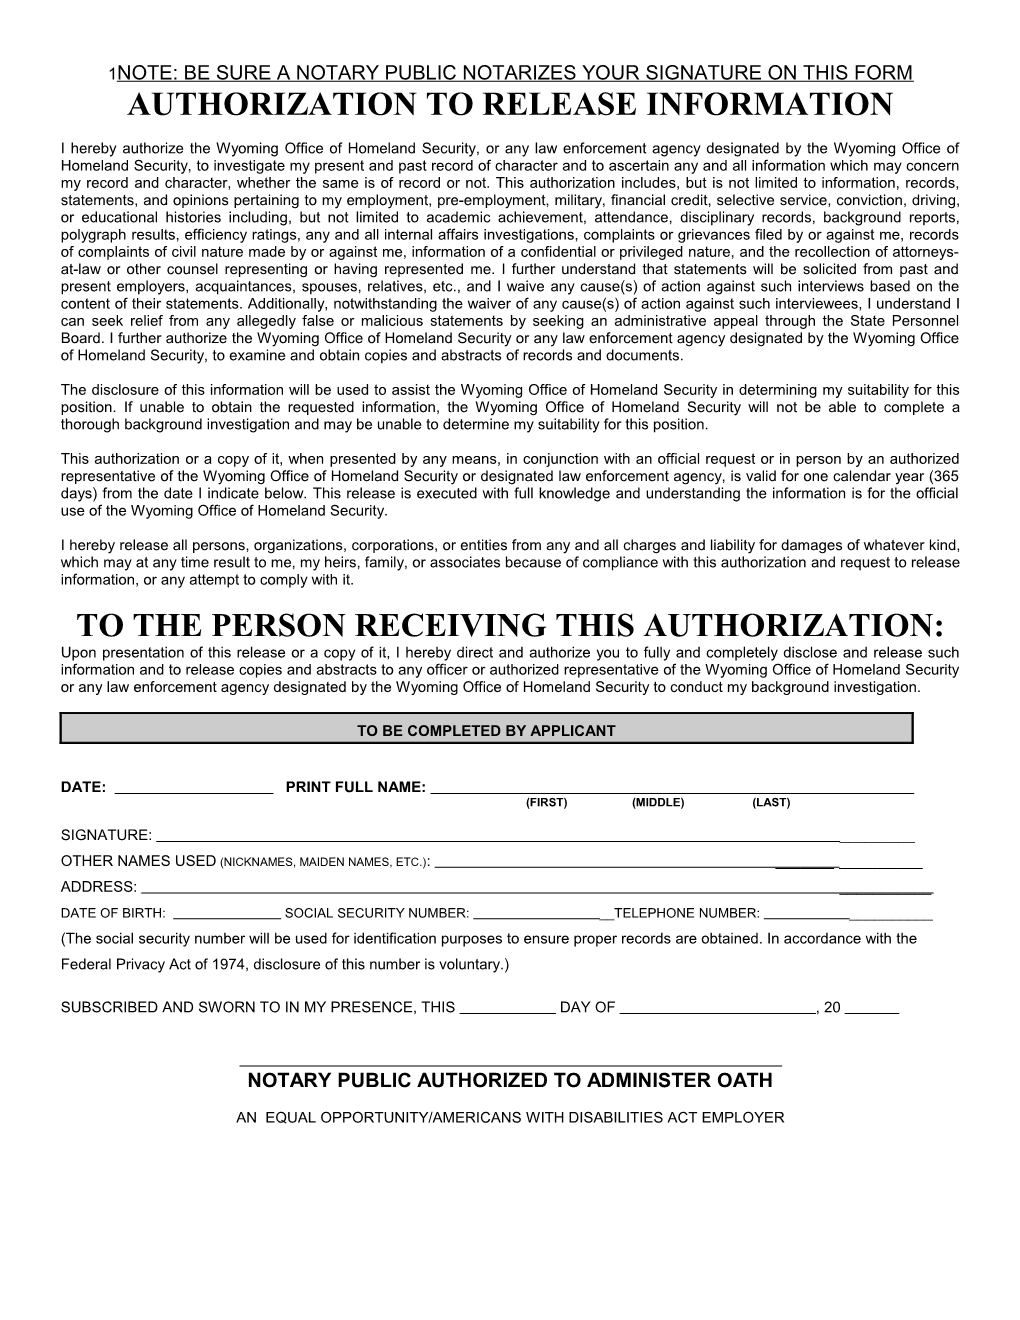 Note: Be Sure a Notary Public Notarizes Your Signature on This Form